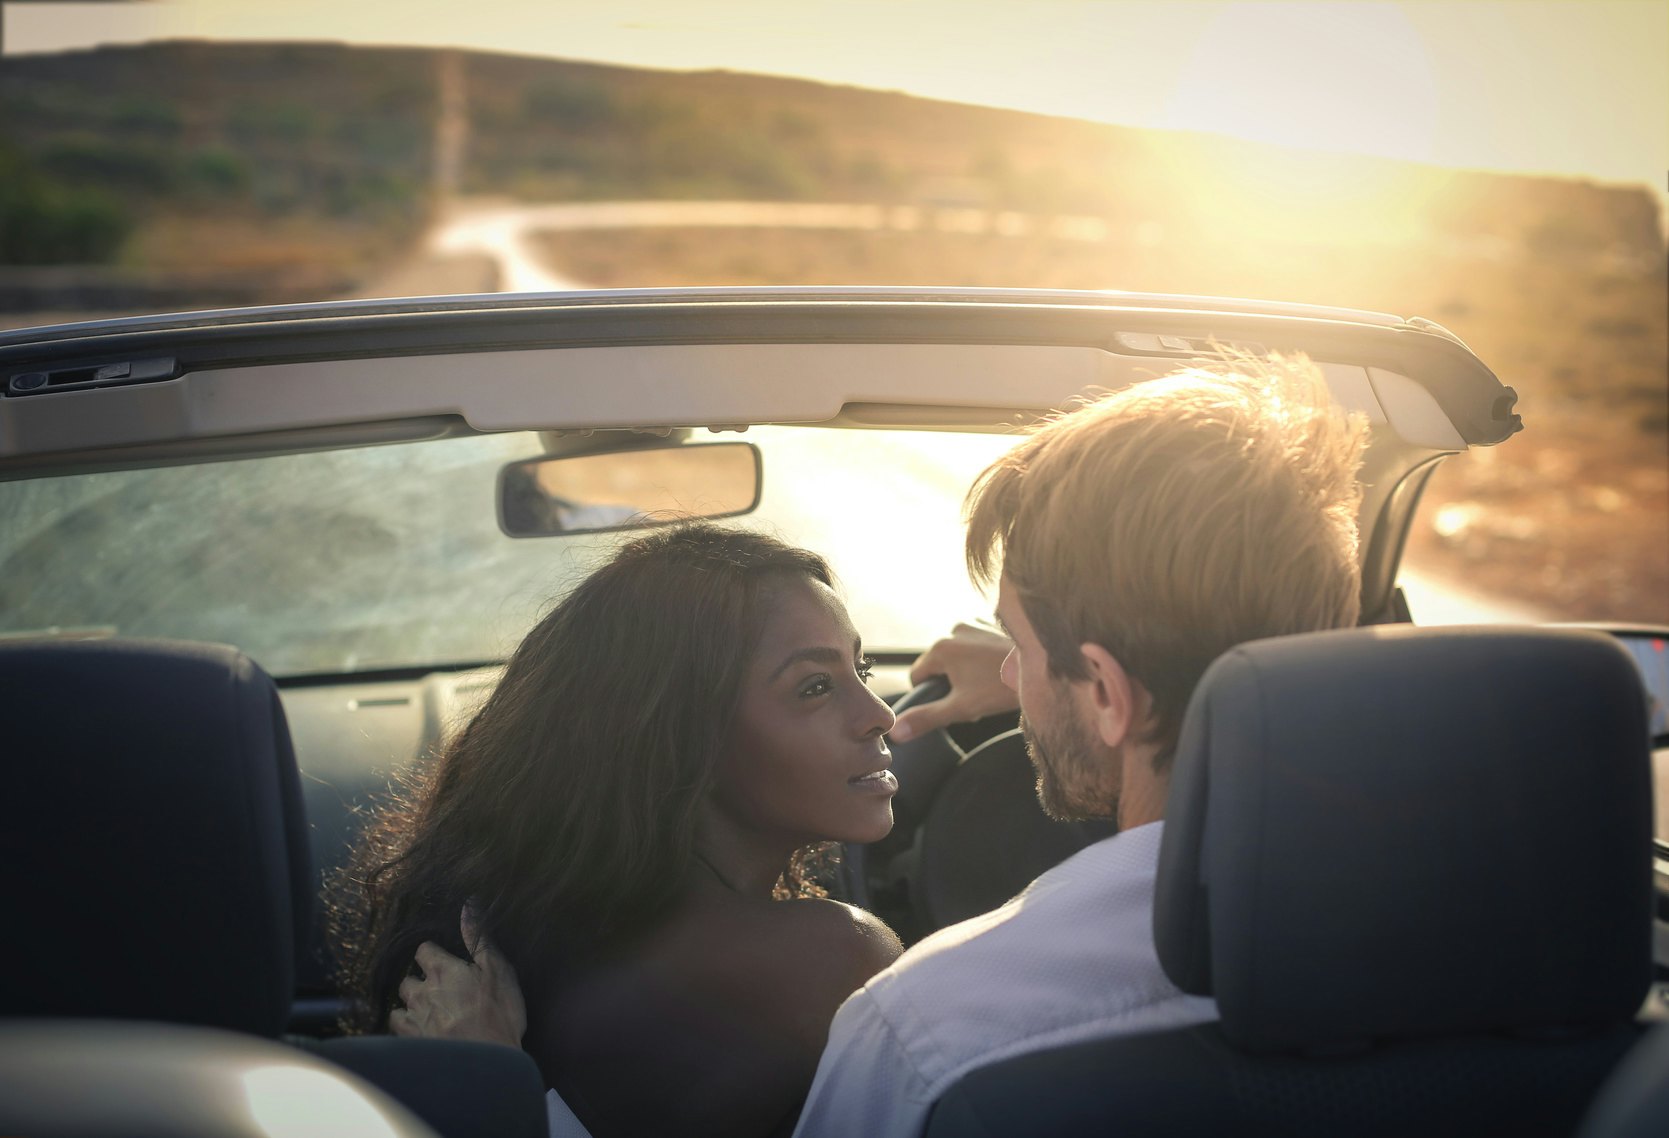 12 Real Life Car Sex Stories, Because The Road Can Be A Sexy Place